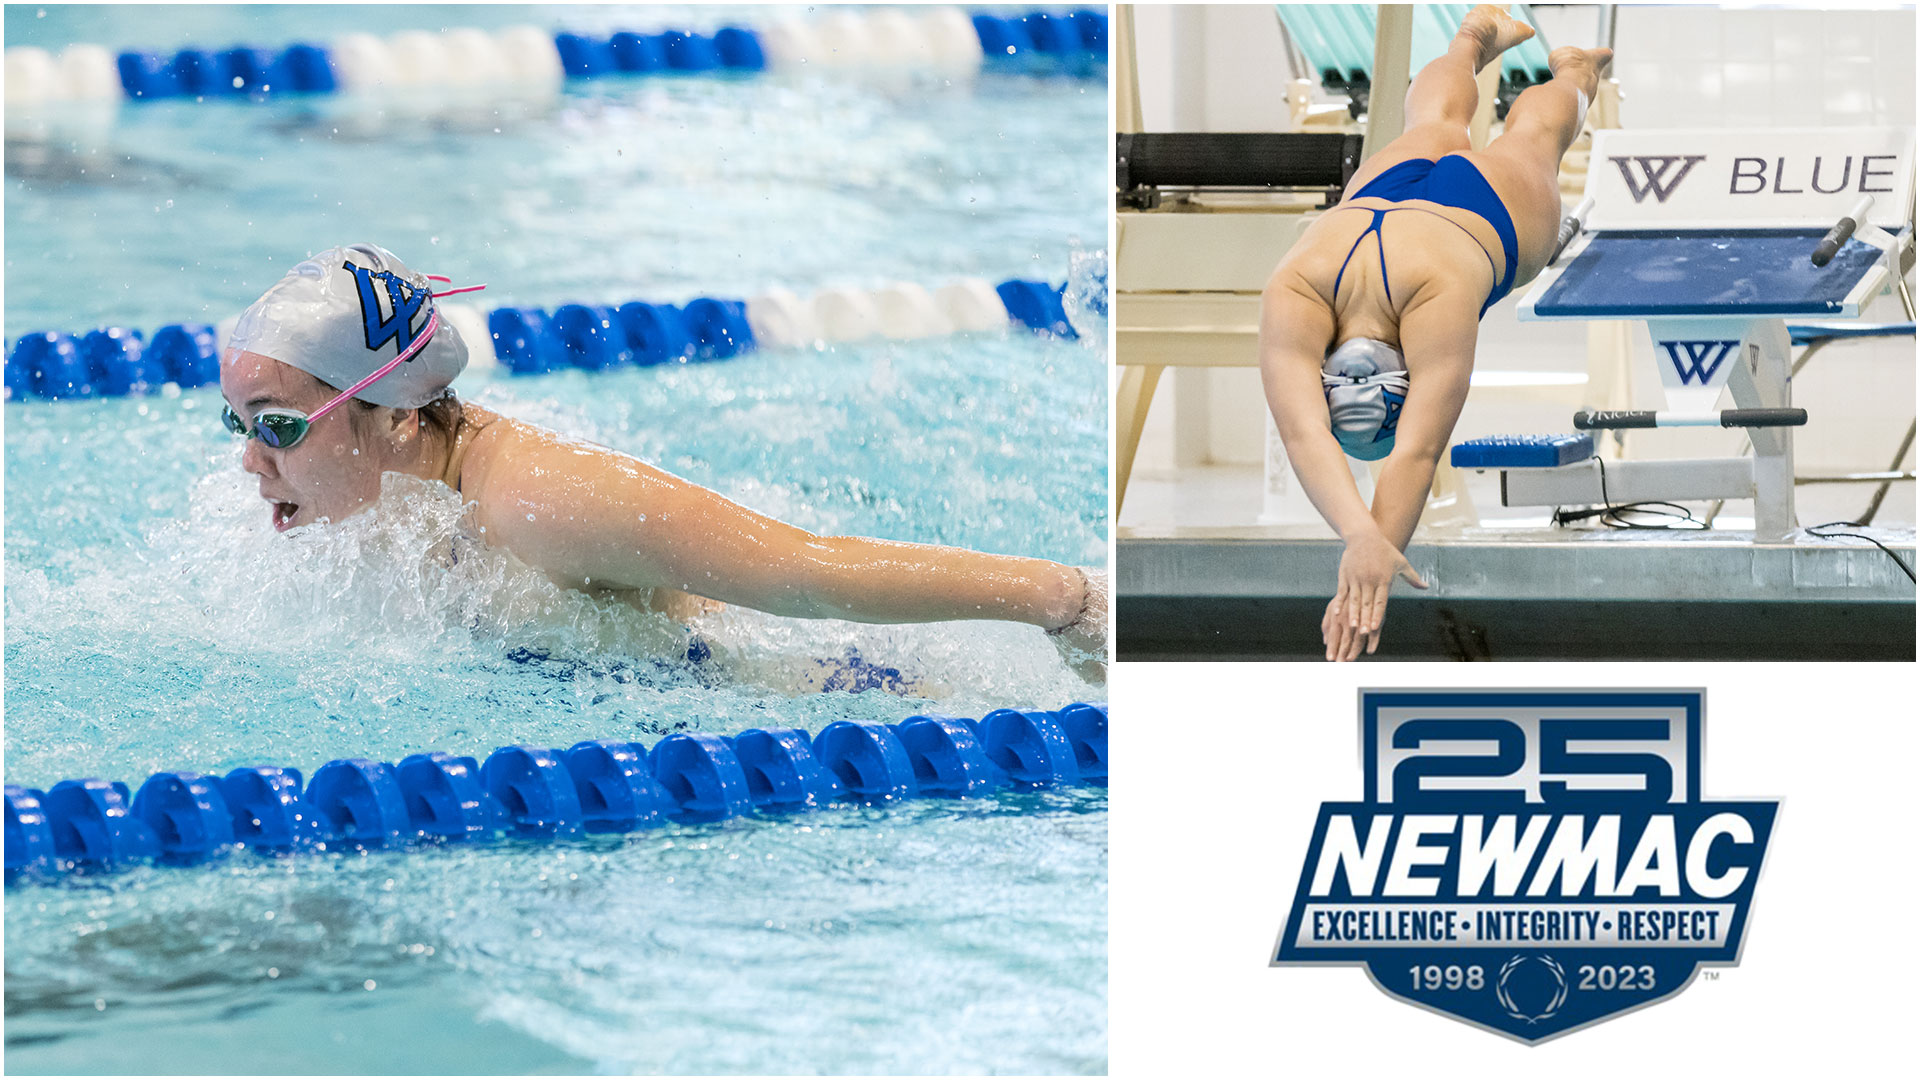 Wellesley competes in the NEWMAC Championships at WPI beginning Thursday